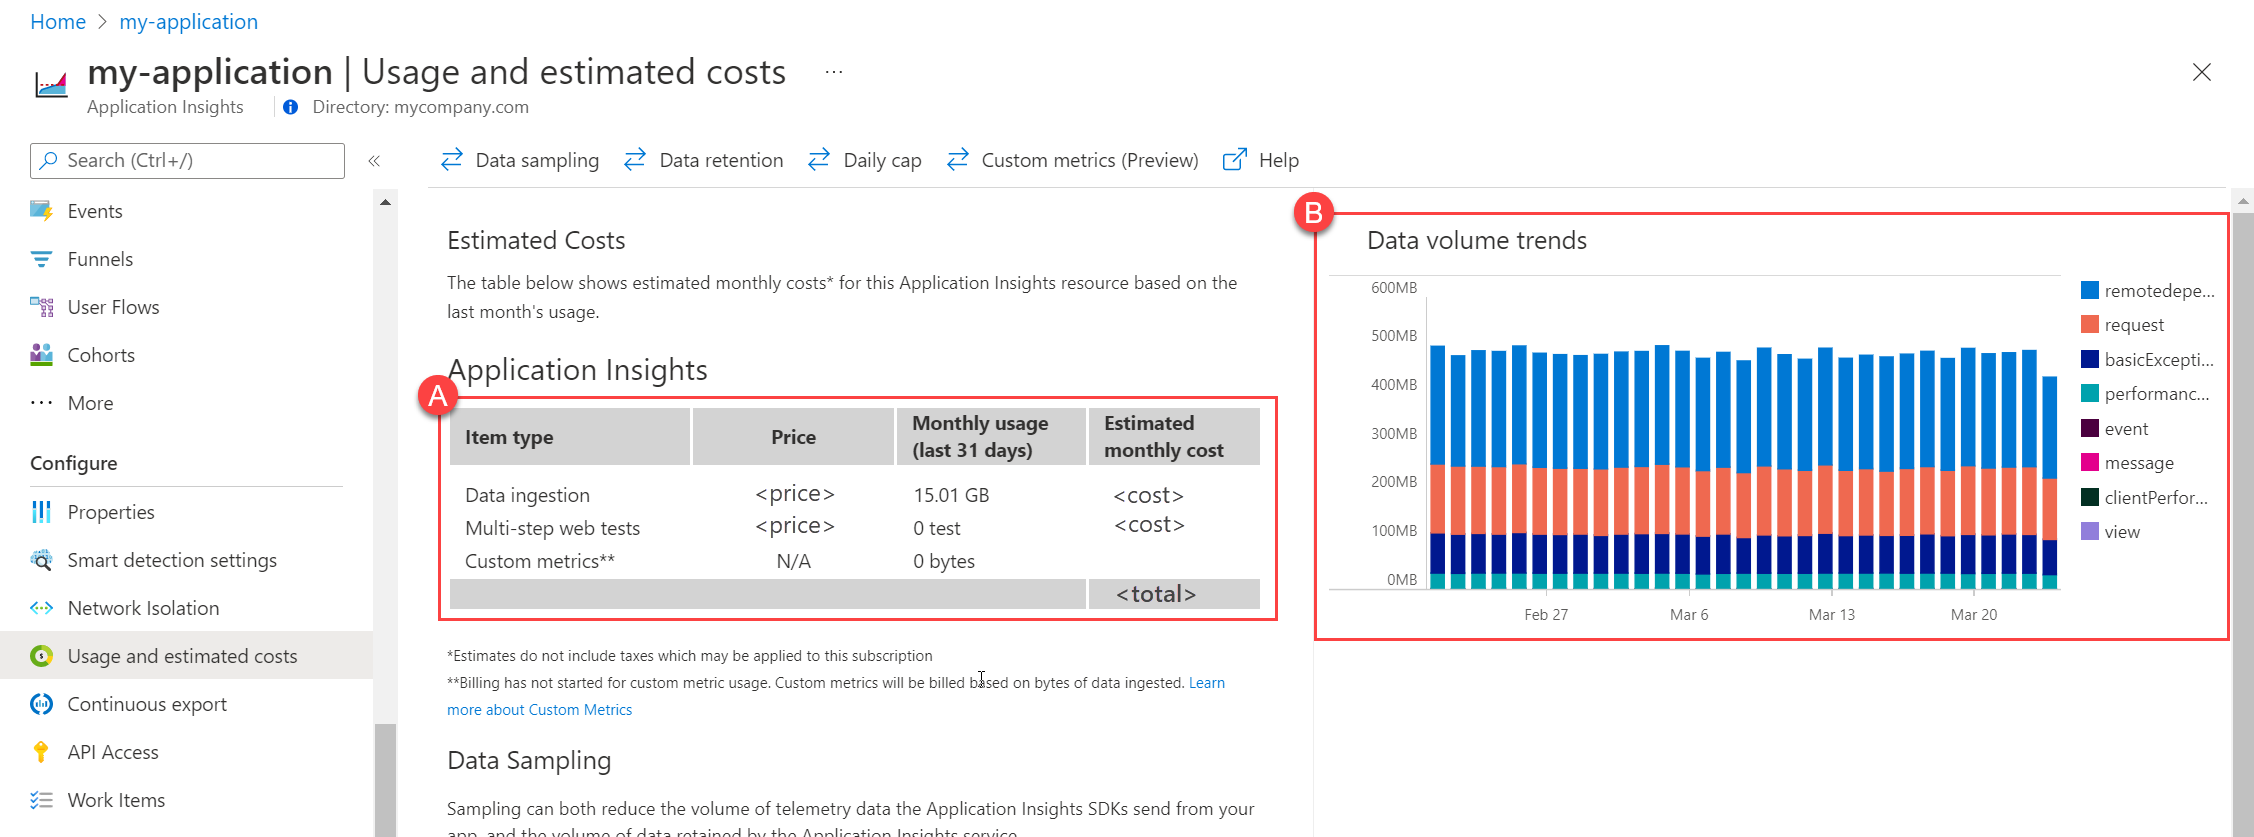 Screenshot of usage and estimated costs for Application Insights in Azure portal.